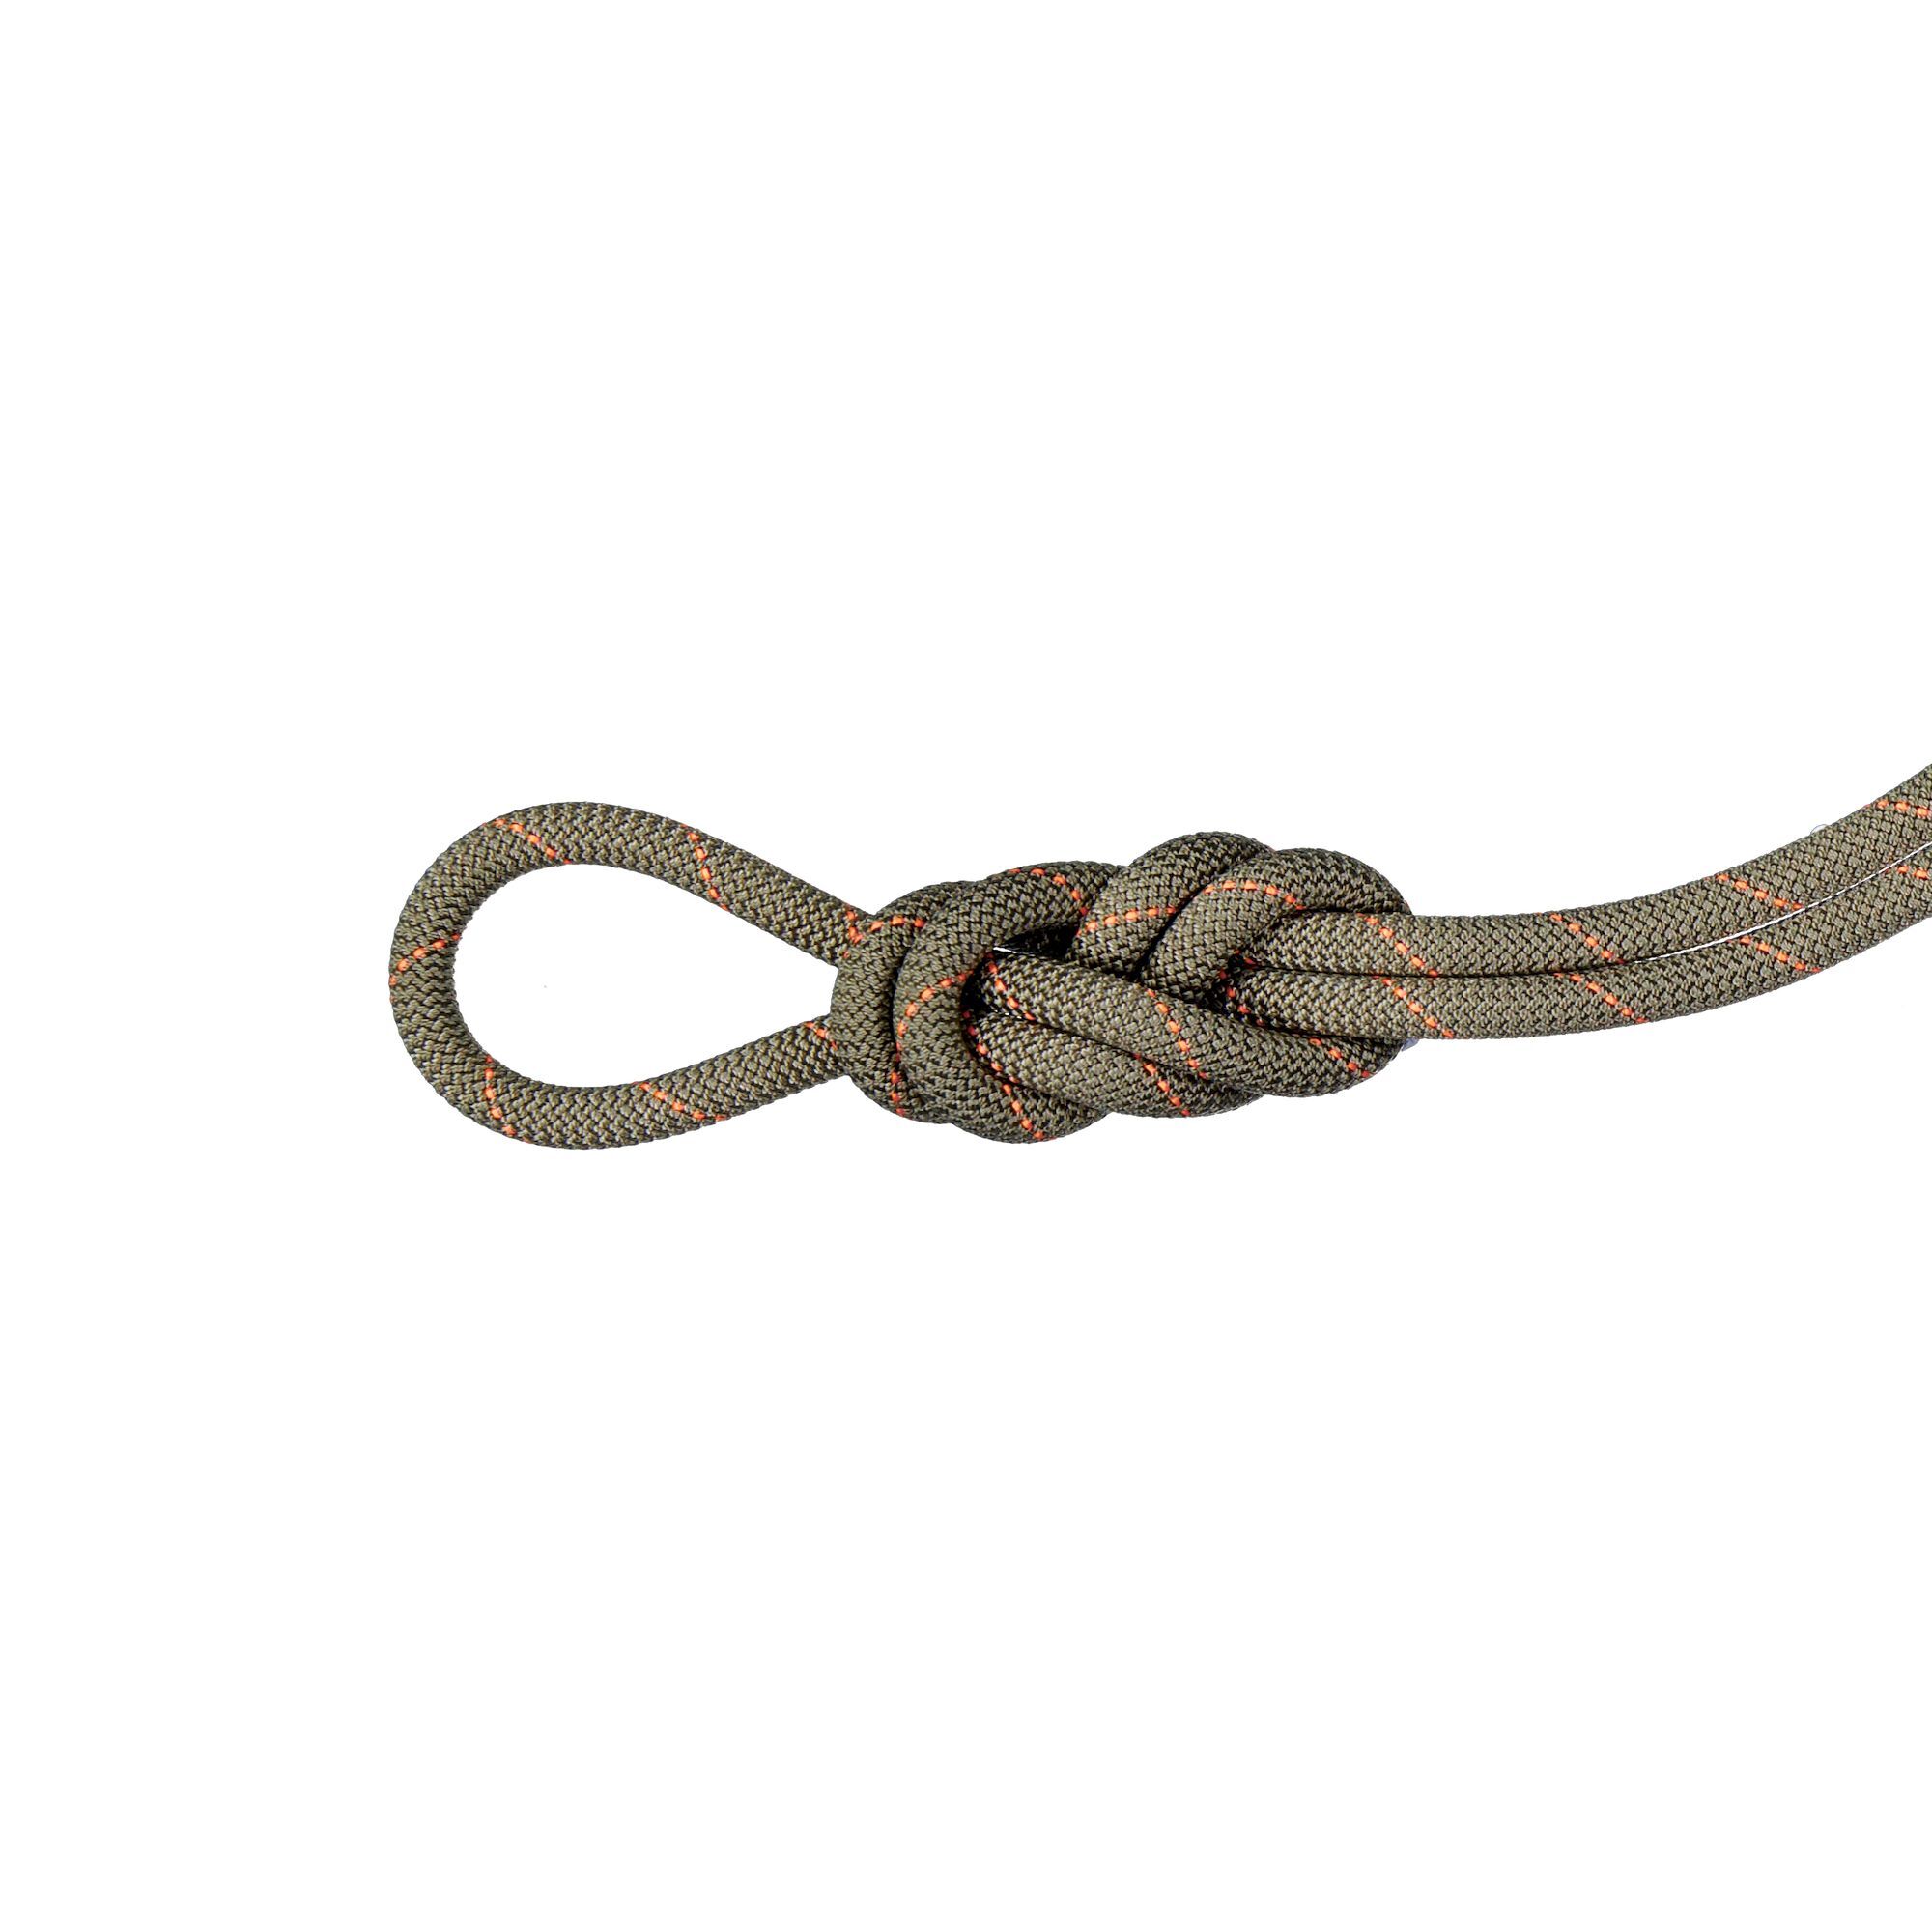 Mammut 9.9 Gym Workhorse Classic Rope - Jednoduché lano | Hardloop